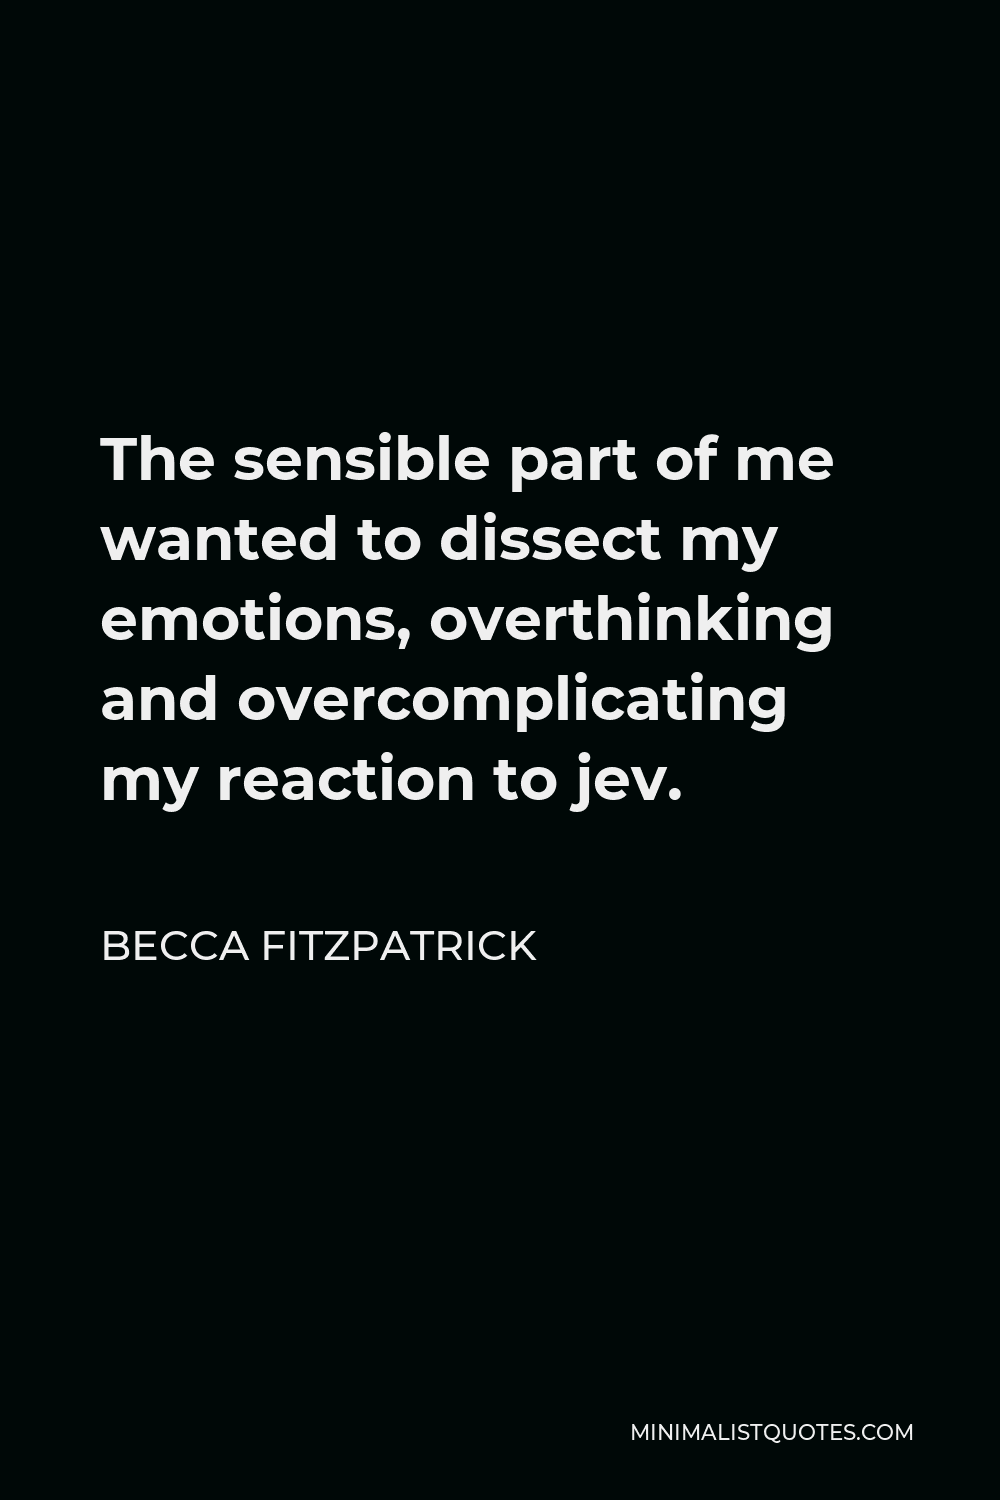 Becca Fitzpatrick Quote - The sensible part of me wanted to dissect my emotions, overthinking and overcomplicating my reaction to jev.